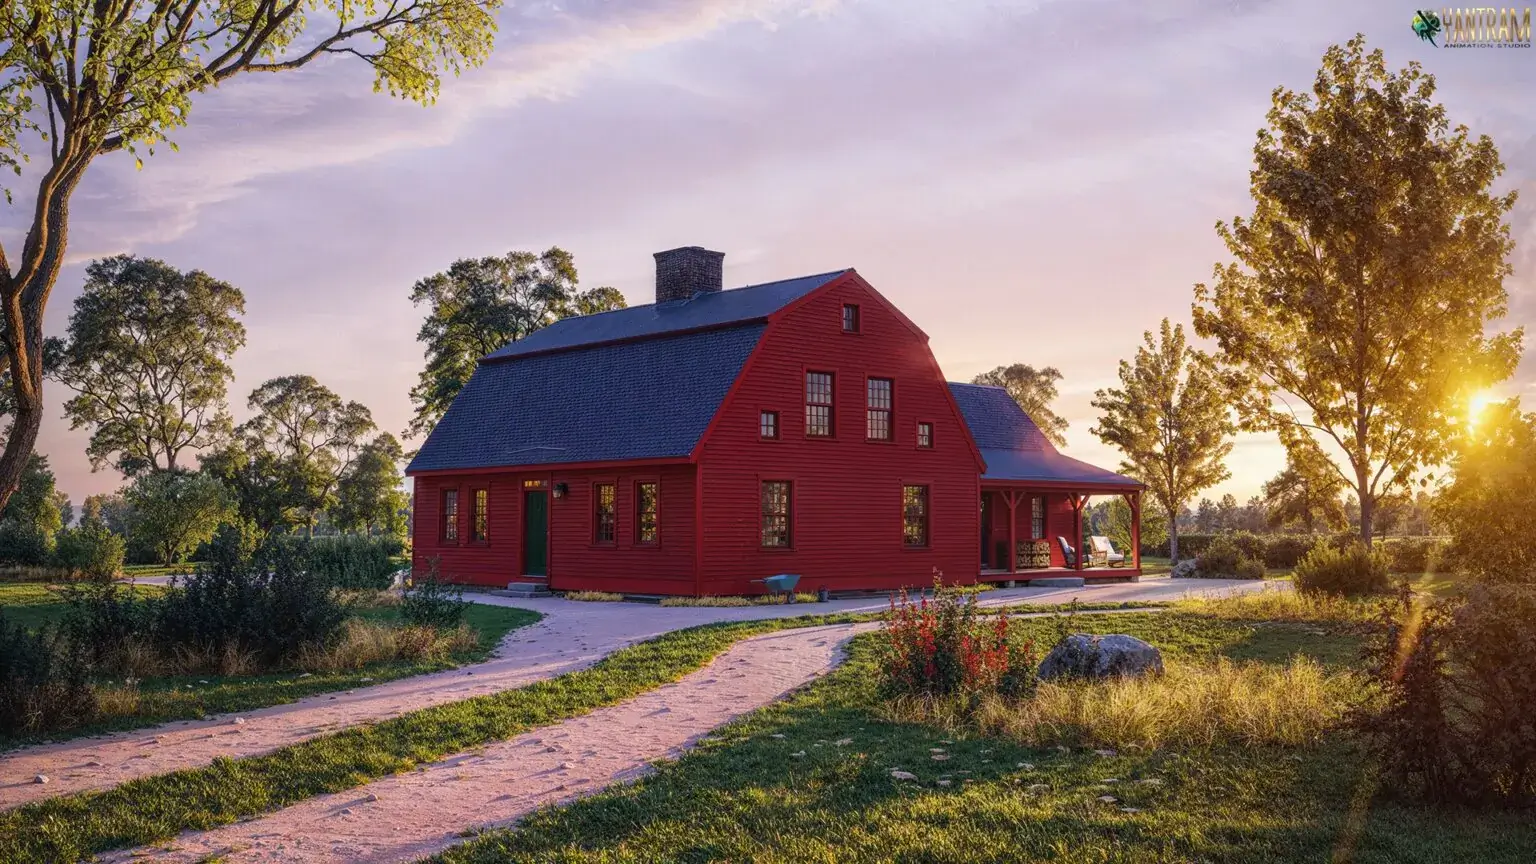 Captivating 3D Architectural Rendering Company in Springfield, Idaho: Red House Design for Country-Rural Living